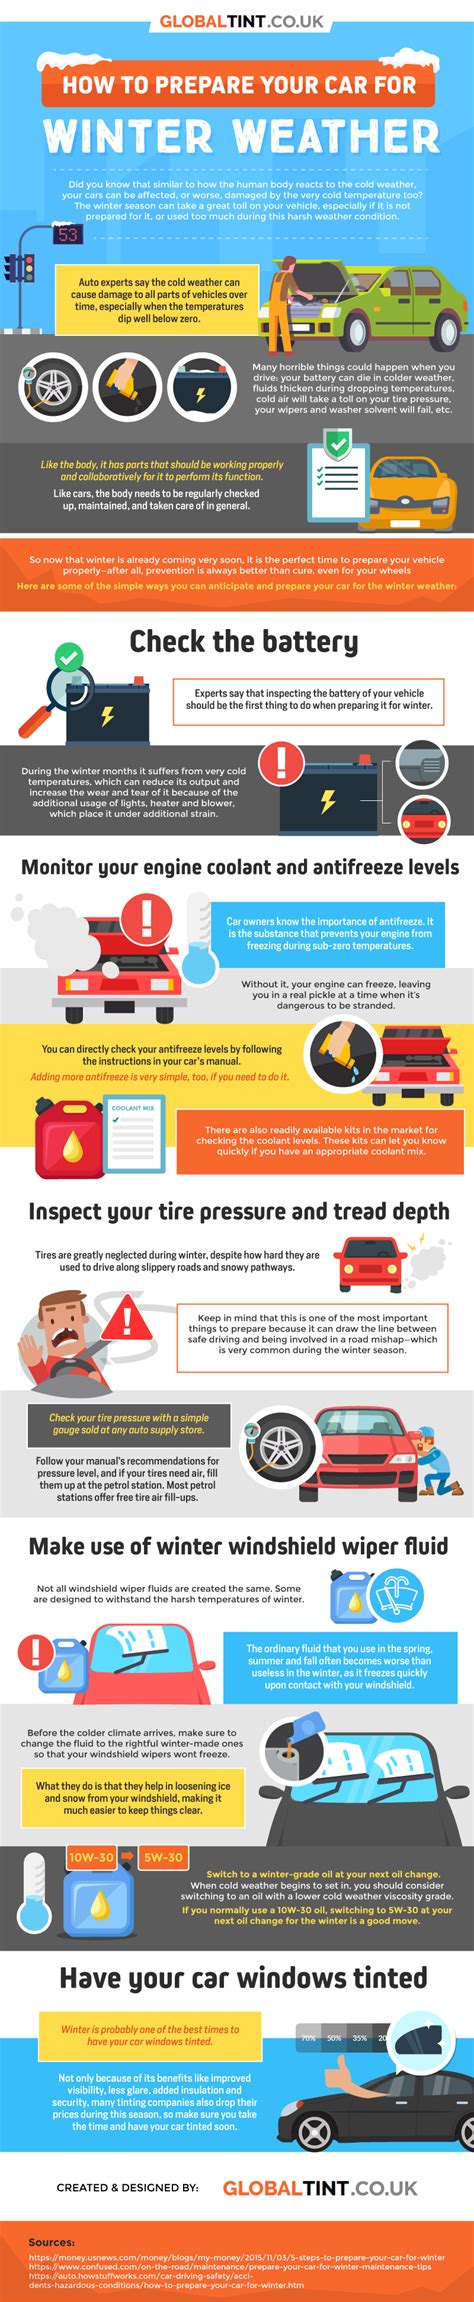 How To Prepare Your Car For Winter Weather Infographic